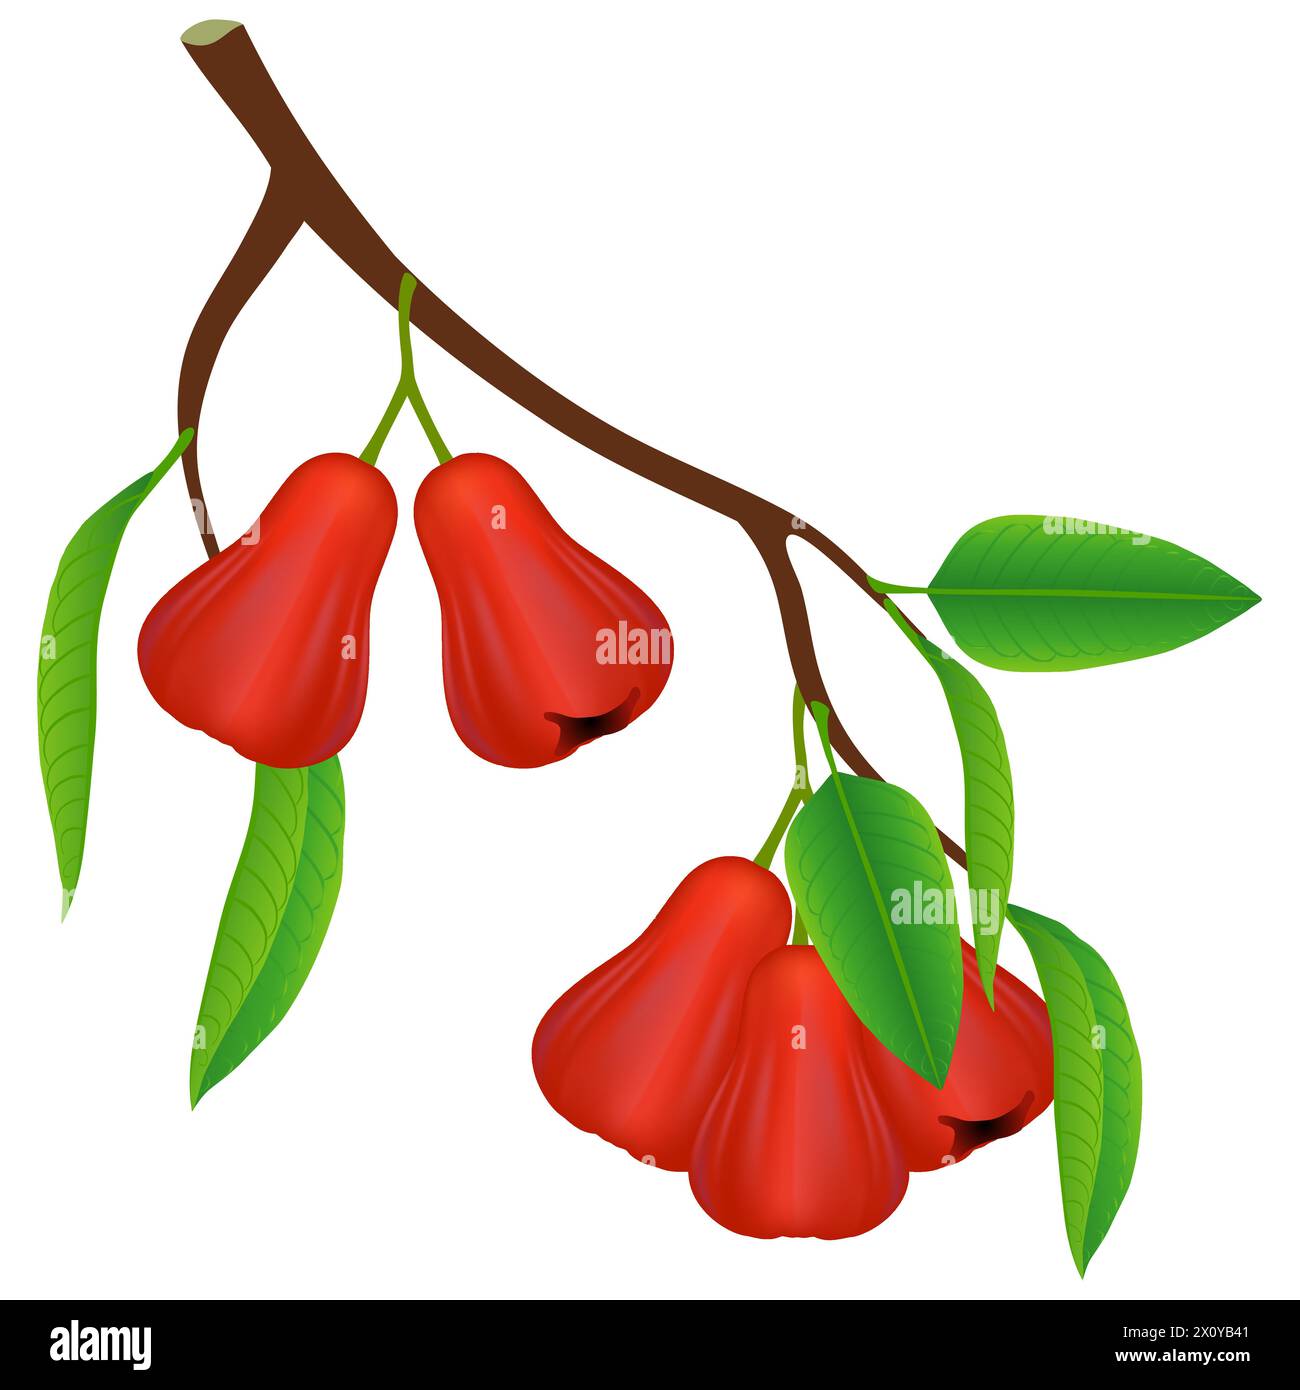 A branch with rose apples and leaves on a white background. Stock Vector